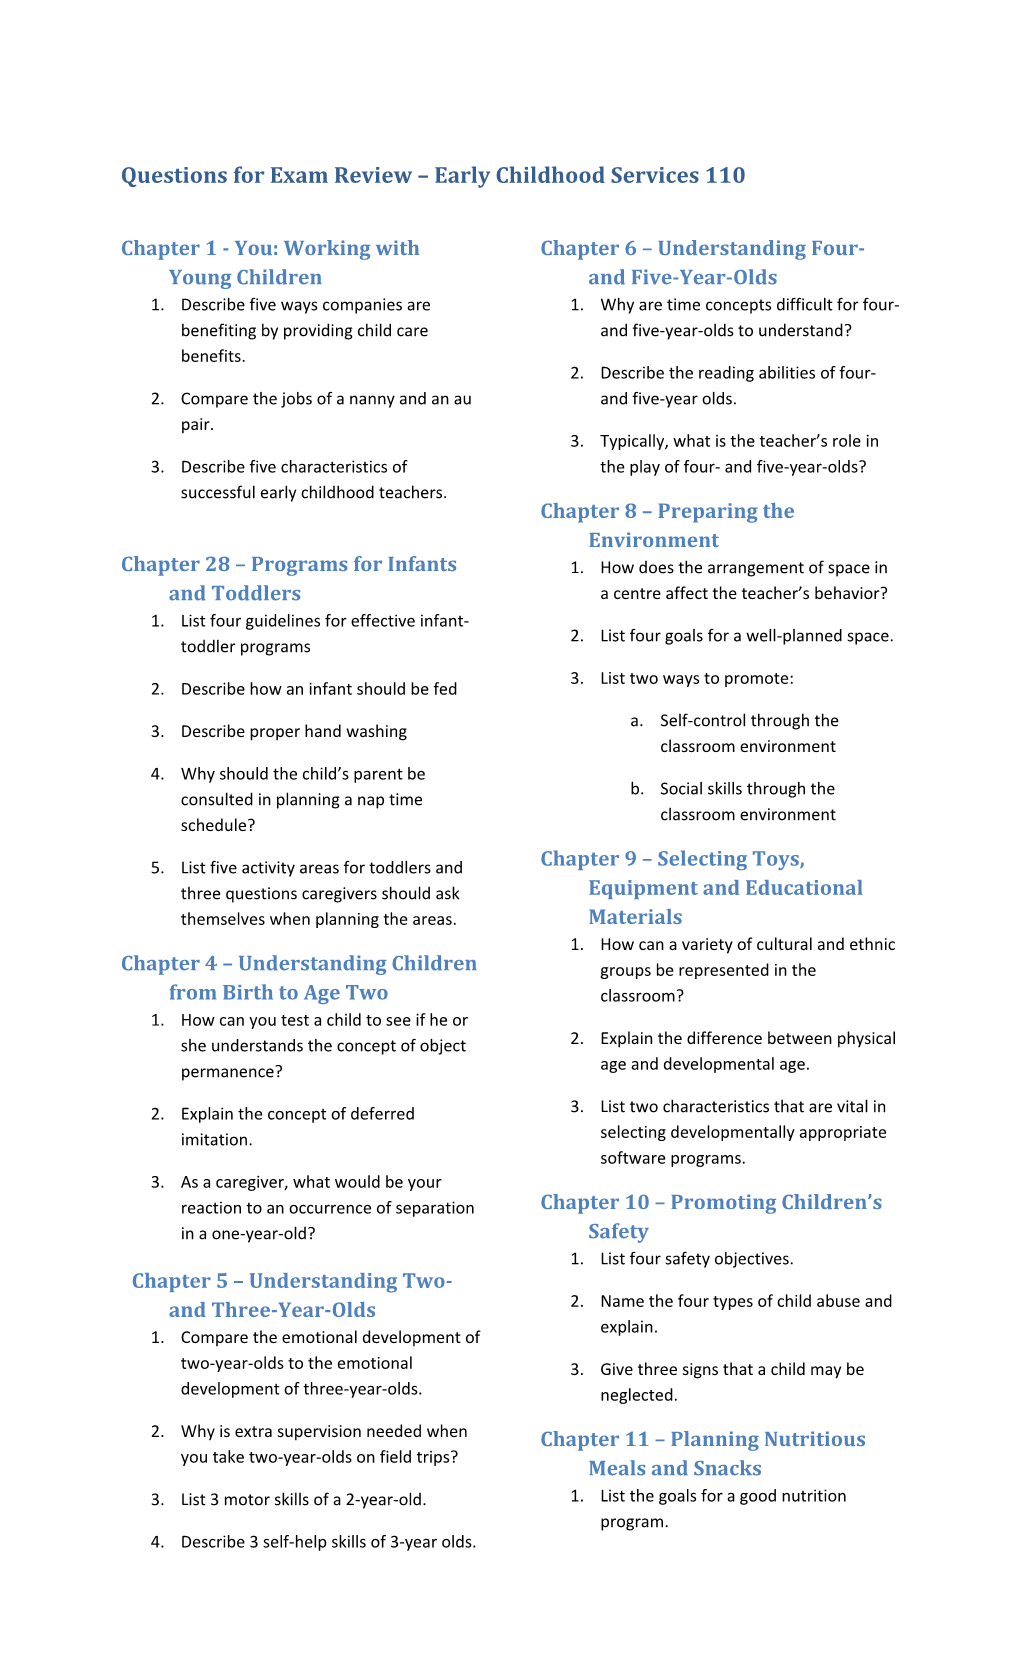 Questions for Exam Review Early Childhood Services 110